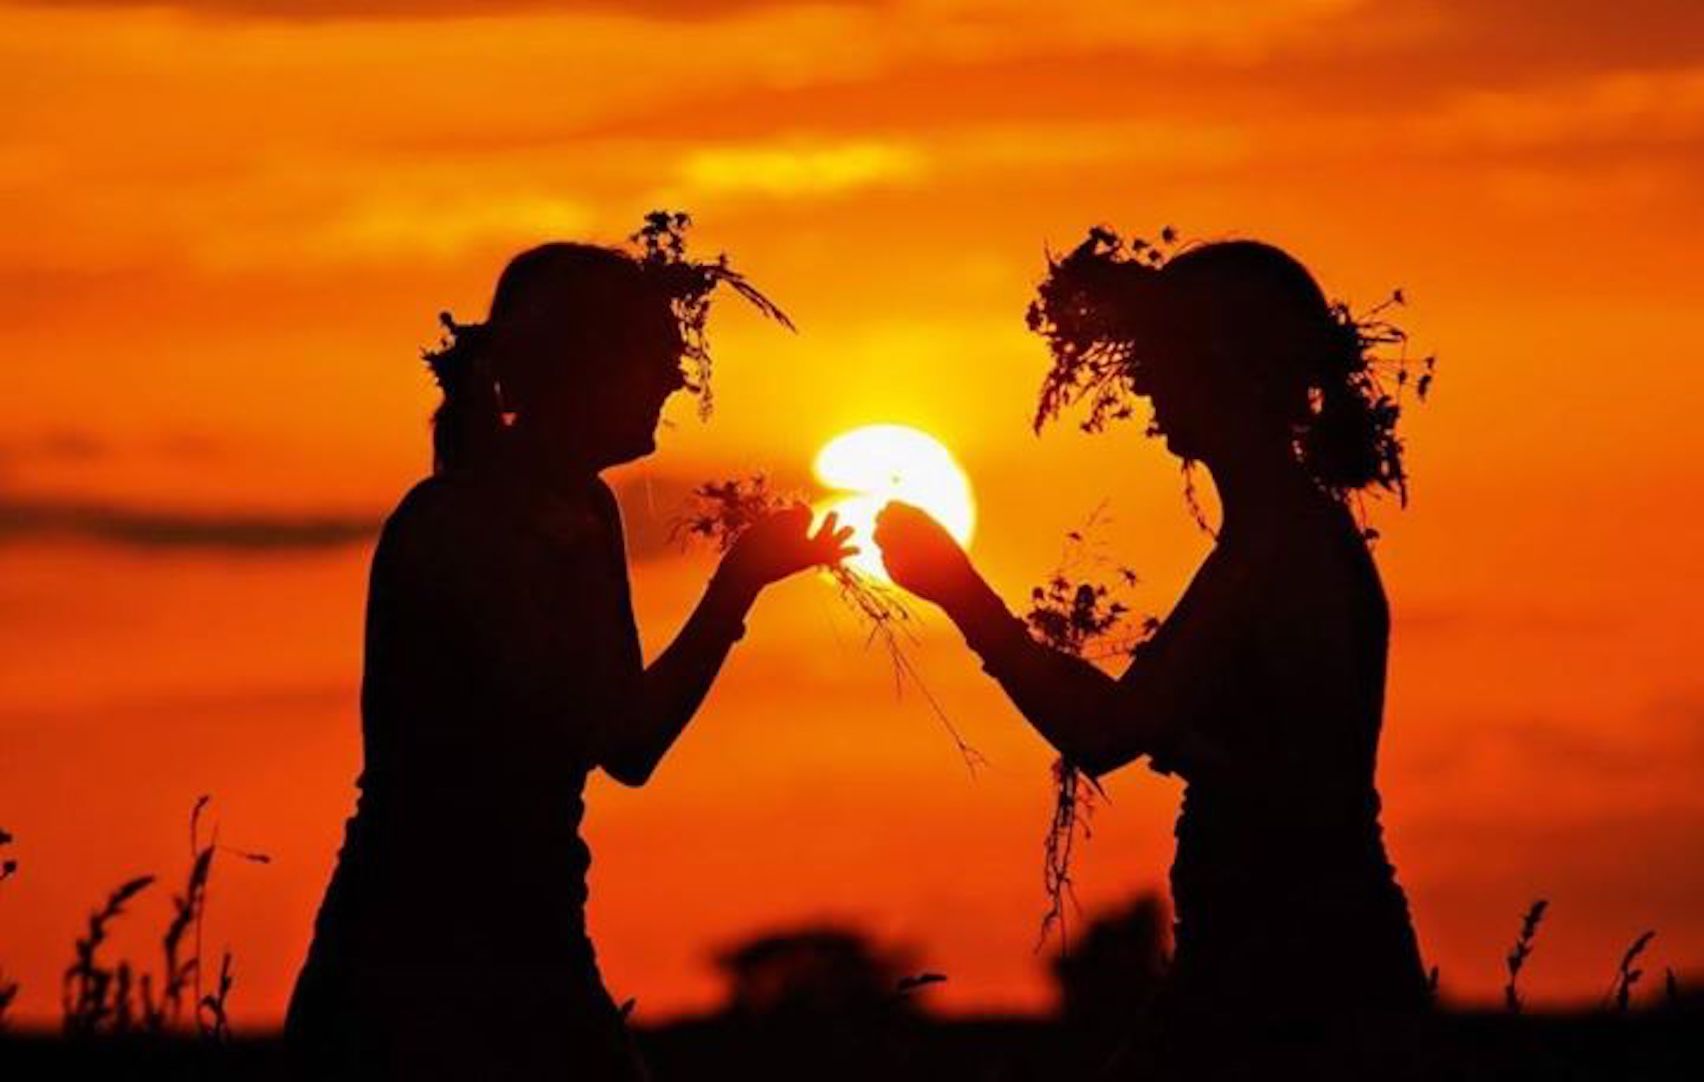 The Summer Solstice The Pagan Festival Of Litha